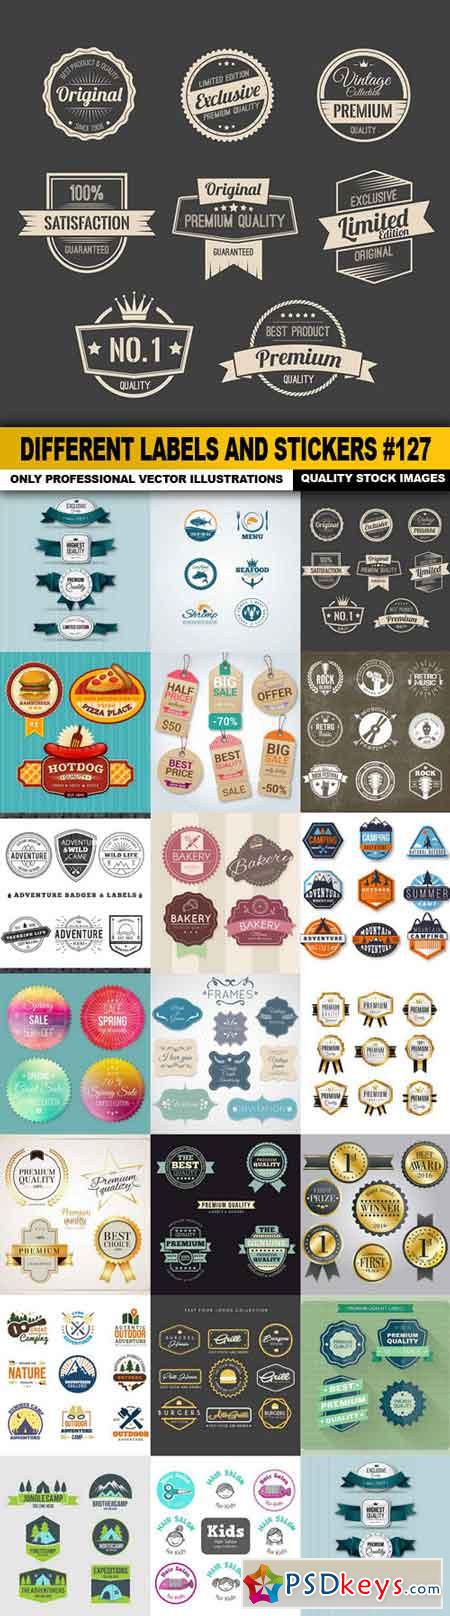 Different Labels And Stickers #127 - 20 Vector